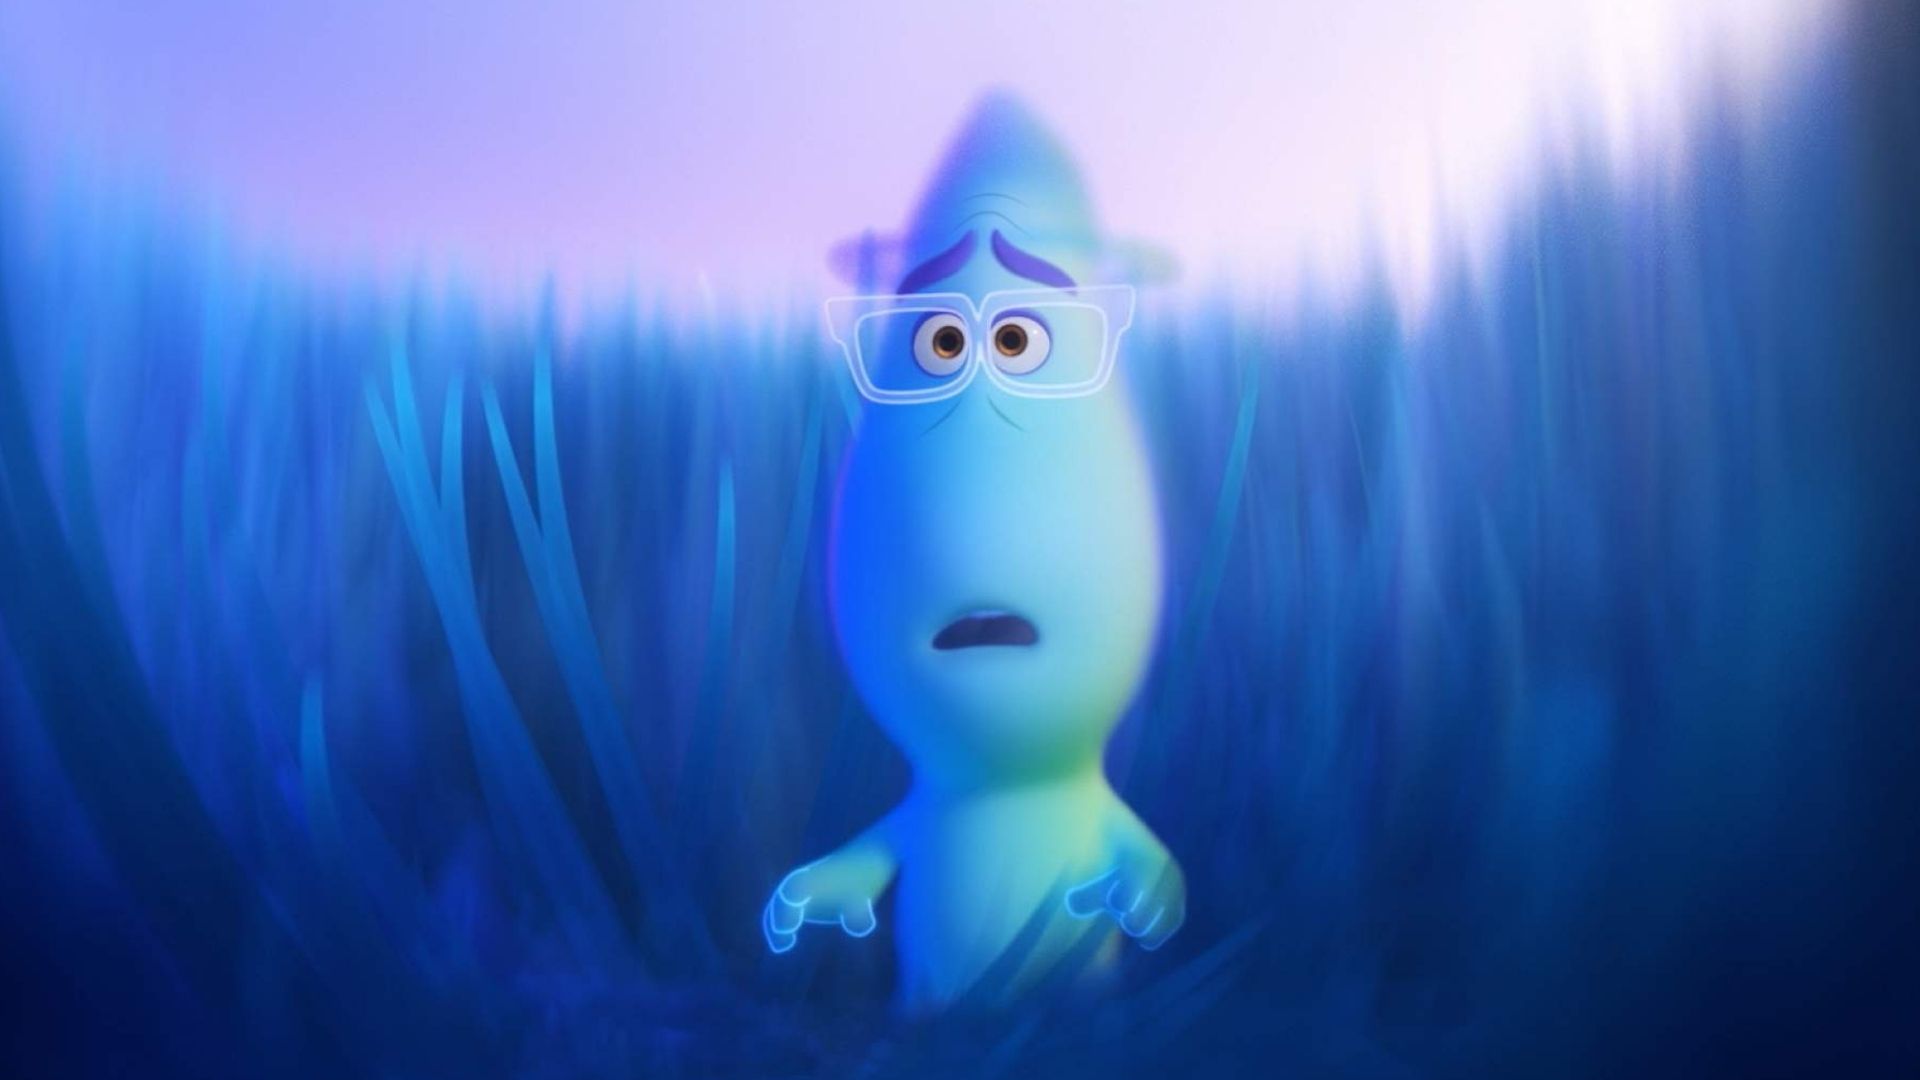 "Soul", created by Pixar studio - article "How grand animation studios use colors"